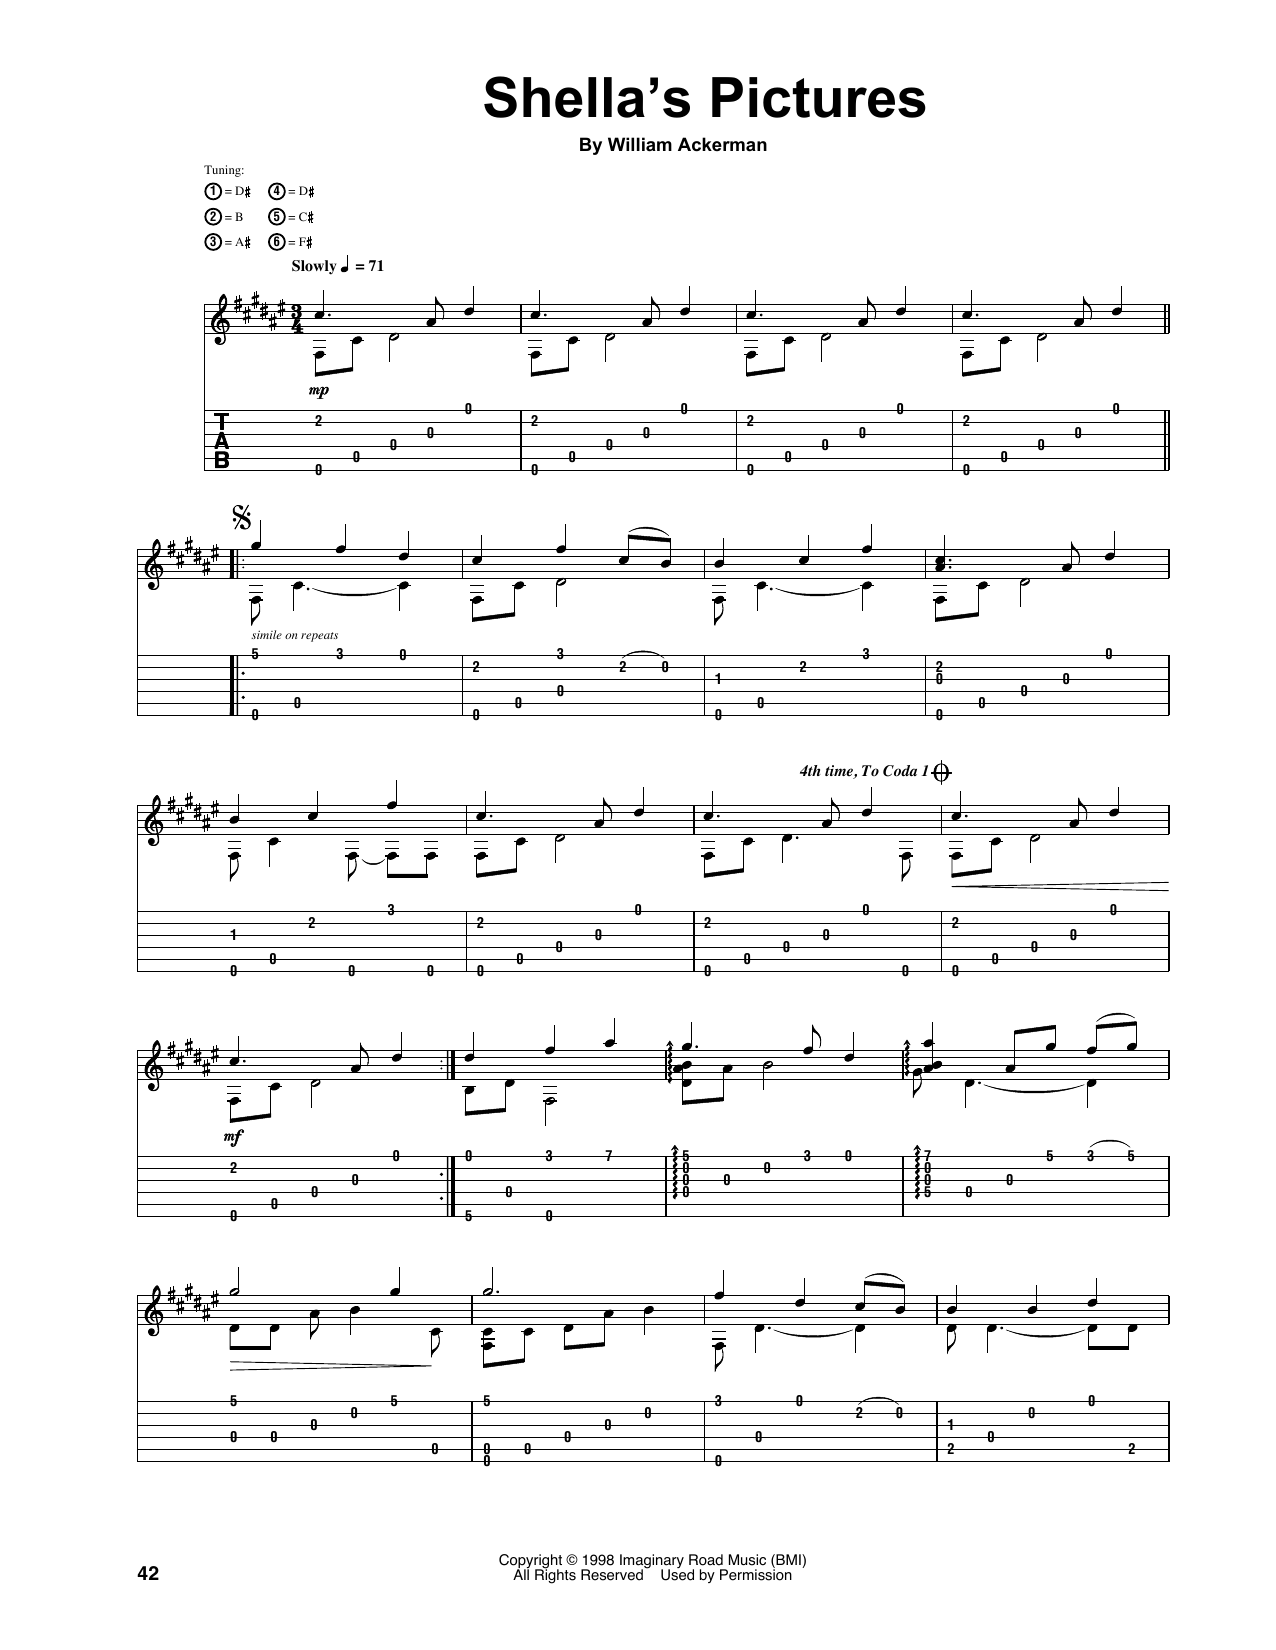 Download Will Ackerman Shella's Pictures Sheet Music